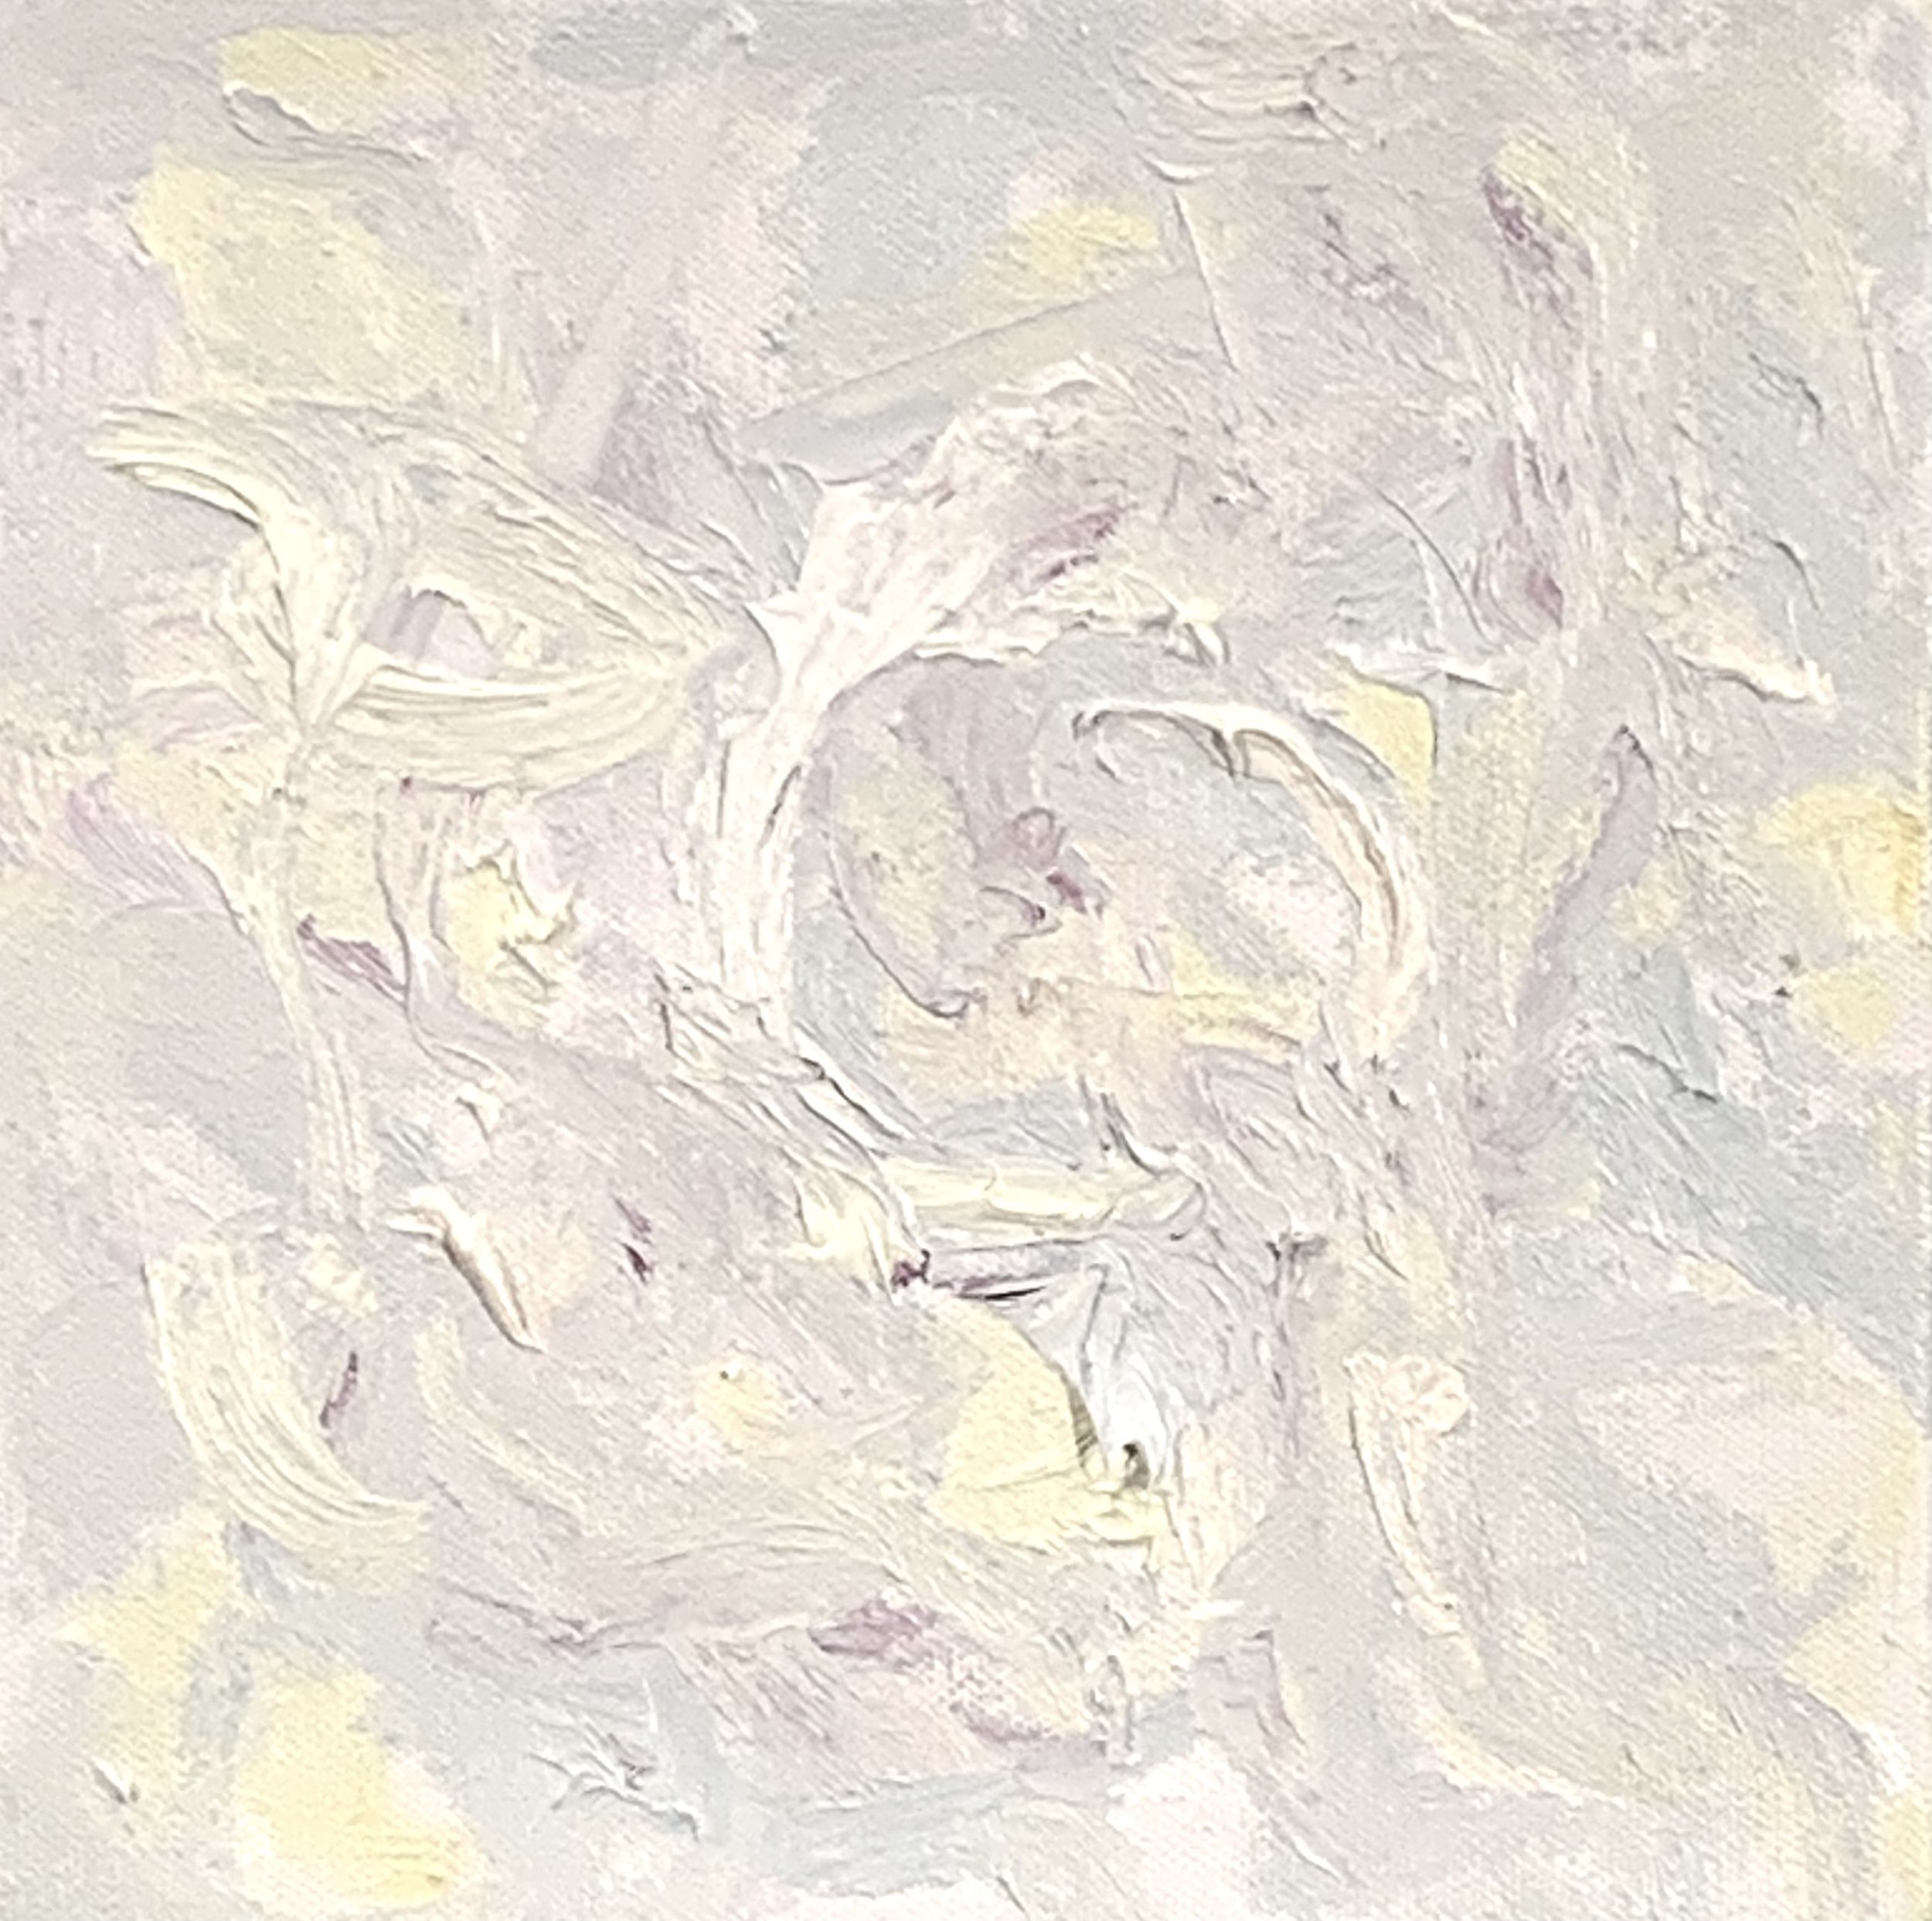 “Air & Clouds (5) No. 24, oil on canvas